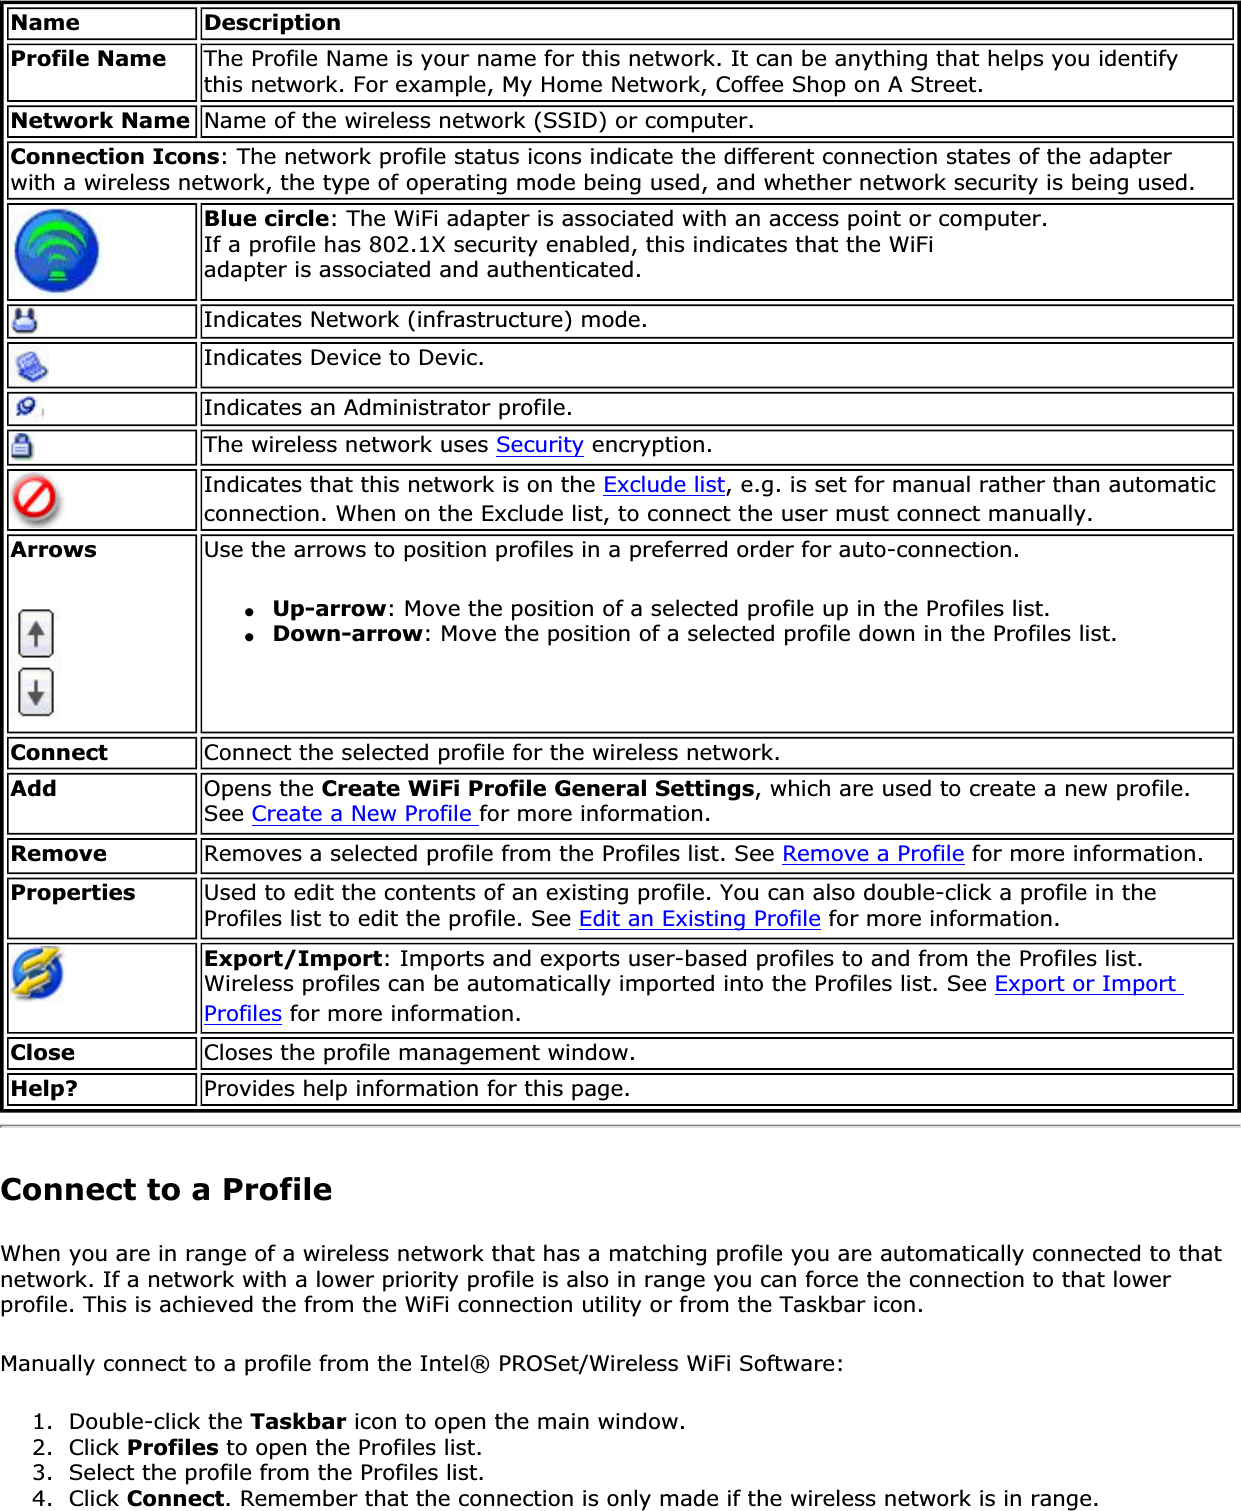 Name DescriptionProfile Name The Profile Name is your name for this network. It can be anything that helps you identify this network. For example, My Home Network, Coffee Shop on A Street.Network Name Name of the wireless network (SSID) or computer.Connection Icons: The network profile status icons indicate the different connection states of the adapter with a wireless network, the type of operating mode being used, and whether network security is being used. Blue circle: The WiFi adapter is associated with an access point or computer.If a profile has 802.1X security enabled, this indicates that the WiFi adapter is associated and authenticated.Indicates Network (infrastructure) mode.Indicates Device to Devic.Indicates an Administrator profile. The wireless network uses Security encryption.Indicates that this network is on the Exclude list, e.g. is set for manual rather than automatic connection. When on the Exclude list, to connect the user must connect manually. Arrows Use the arrows to position profiles in a preferred order for auto-connection. ●Up-arrow: Move the position of a selected profile up in the Profiles list.●Down-arrow: Move the position of a selected profile down in the Profiles list.Connect Connect the selected profile for the wireless network.Add Opens the Create WiFi Profile General Settings, which are used to create a new profile. See Create a New Profile for more information.Remove Removes a selected profile from the Profiles list. See Remove a Profile for more information.Properties Used to edit the contents of an existing profile. You can also double-click a profile in the Profiles list to edit the profile. See Edit an Existing Profile for more information.Export/Import: Imports and exports user-based profiles to and from the Profiles list. Wireless profiles can be automatically imported into the Profiles list. See Export or Import Profiles for more information.Close Closes the profile management window.Help? Provides help information for this page.Connect to a ProfileWhen you are in range of a wireless network that has a matching profile you are automatically connected to that network. If a network with a lower priority profile is also in range you can force the connection to that lower profile. This is achieved the from the WiFi connection utility or from the Taskbar icon. Manually connect to a profile from the Intel® PROSet/Wireless WiFi Software:1.  Double-click the Taskbar icon to open the main window.2.  Click Profiles to open the Profiles list.3.  Select the profile from the Profiles list.4.  Click Connect. Remember that the connection is only made if the wireless network is in range.